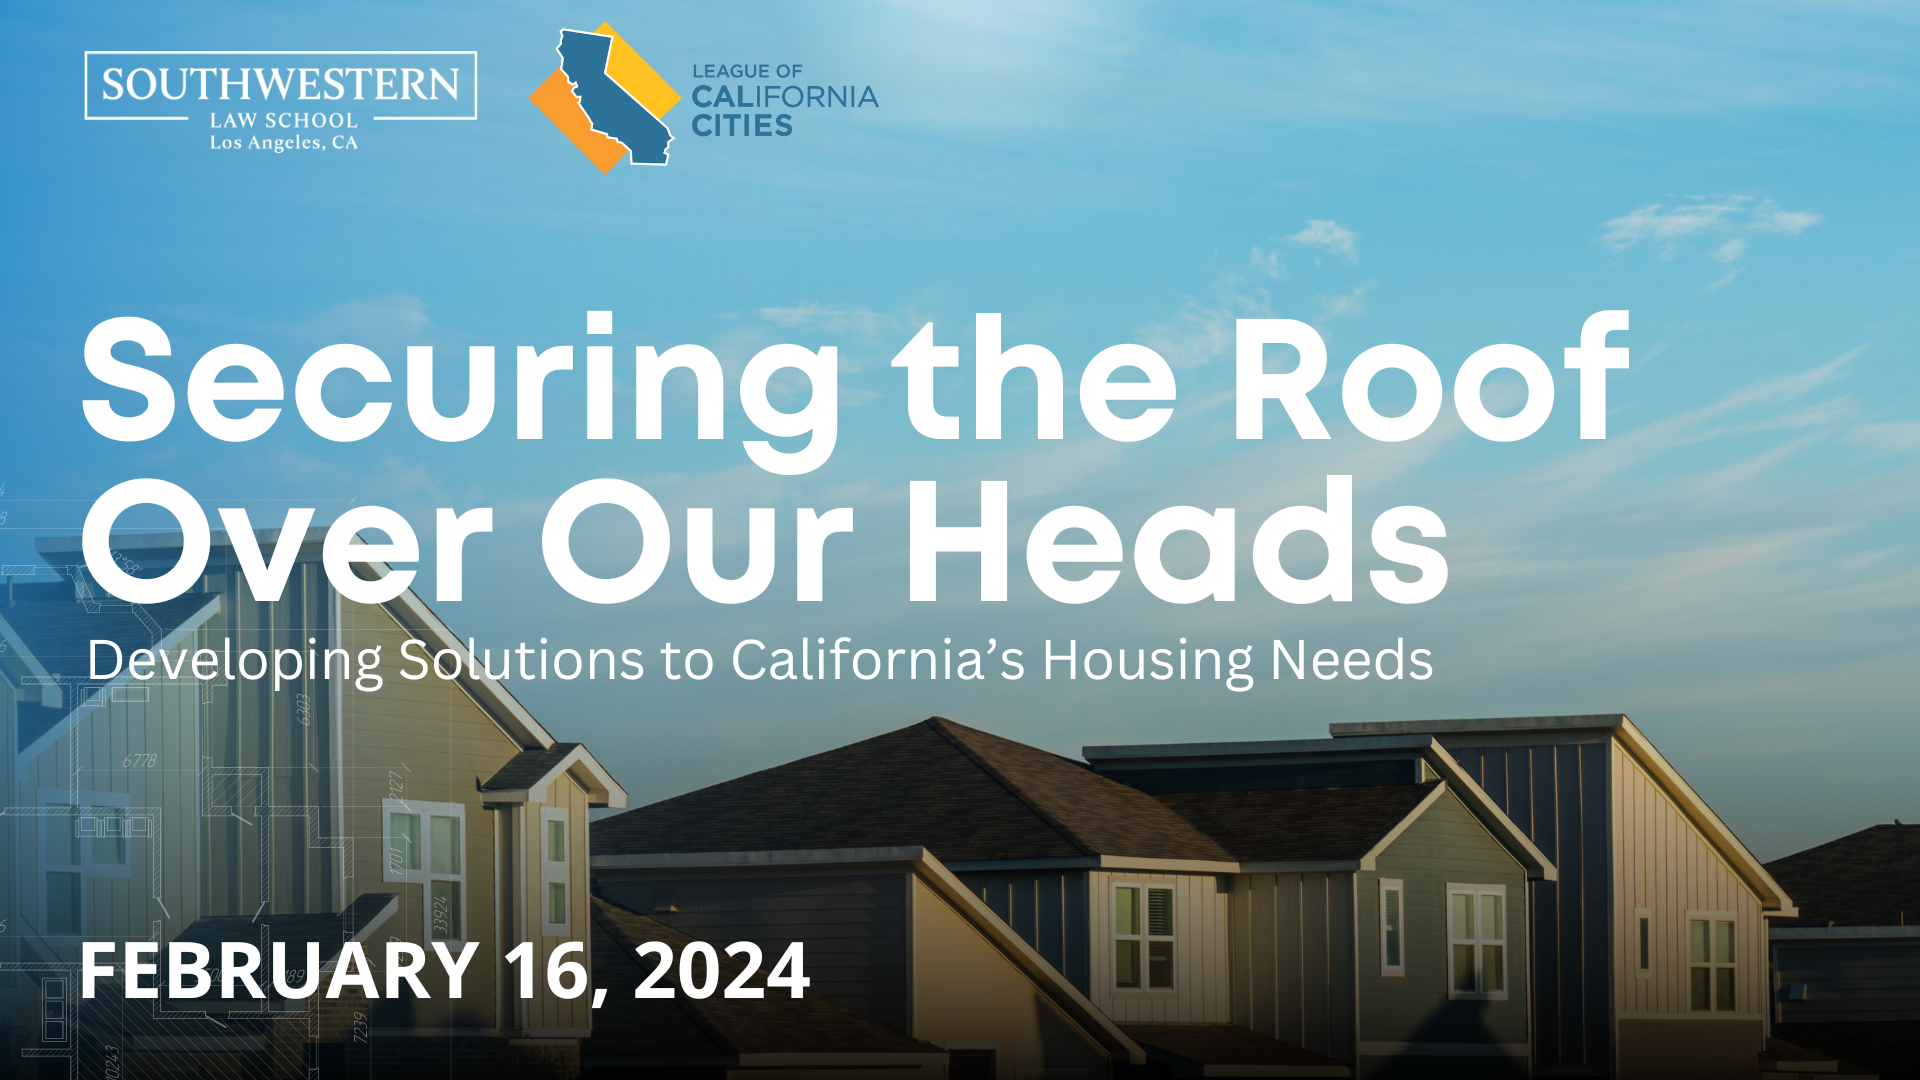 Securing the Roof Over Our Heads: Developing Solutions to California's Housing Needs, February 16, 2024